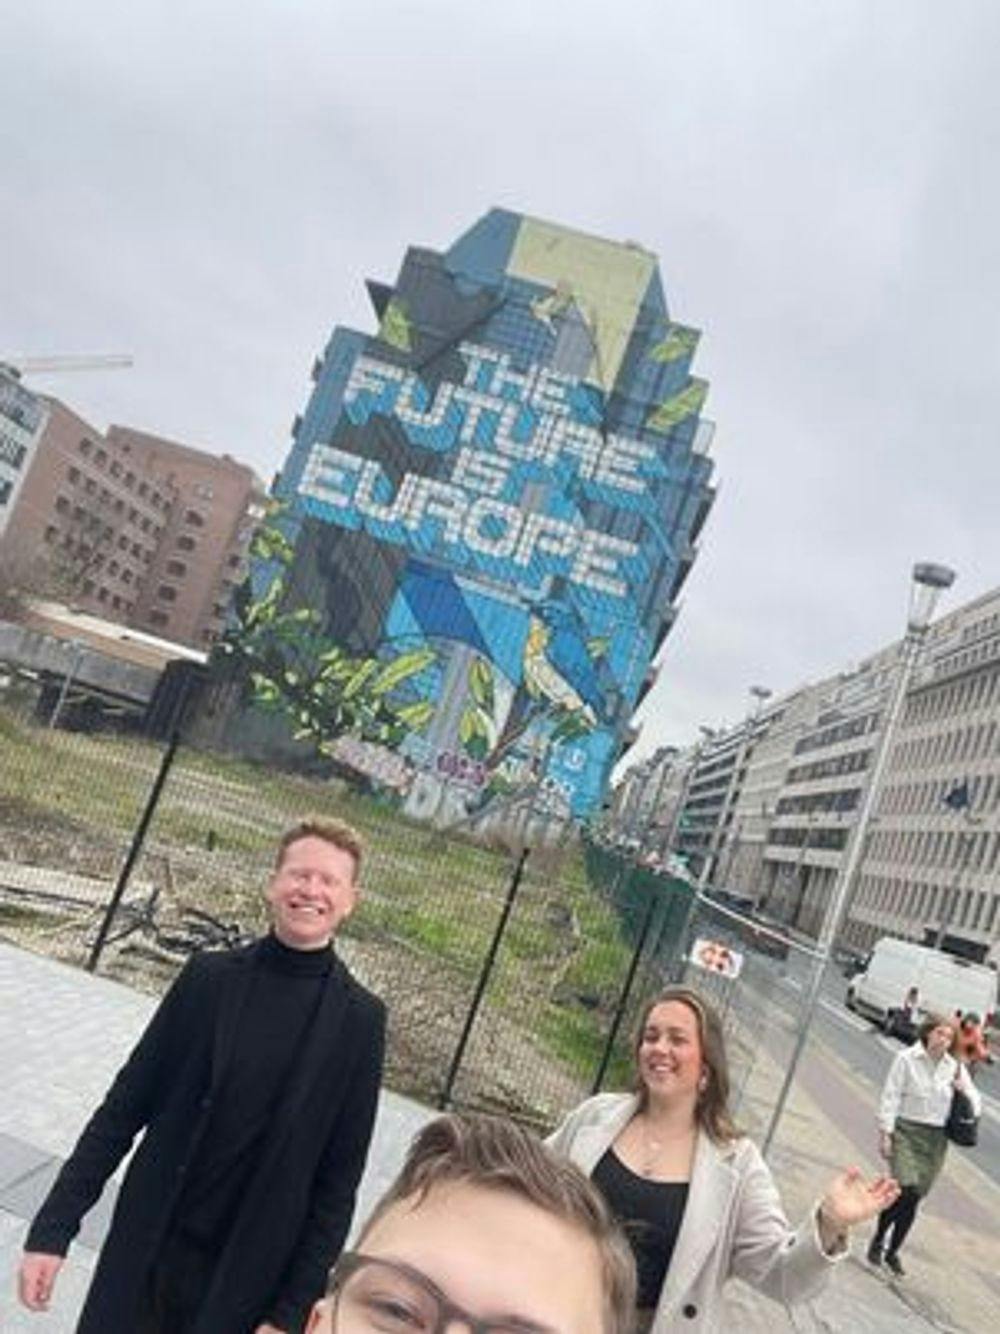 The future is Europe